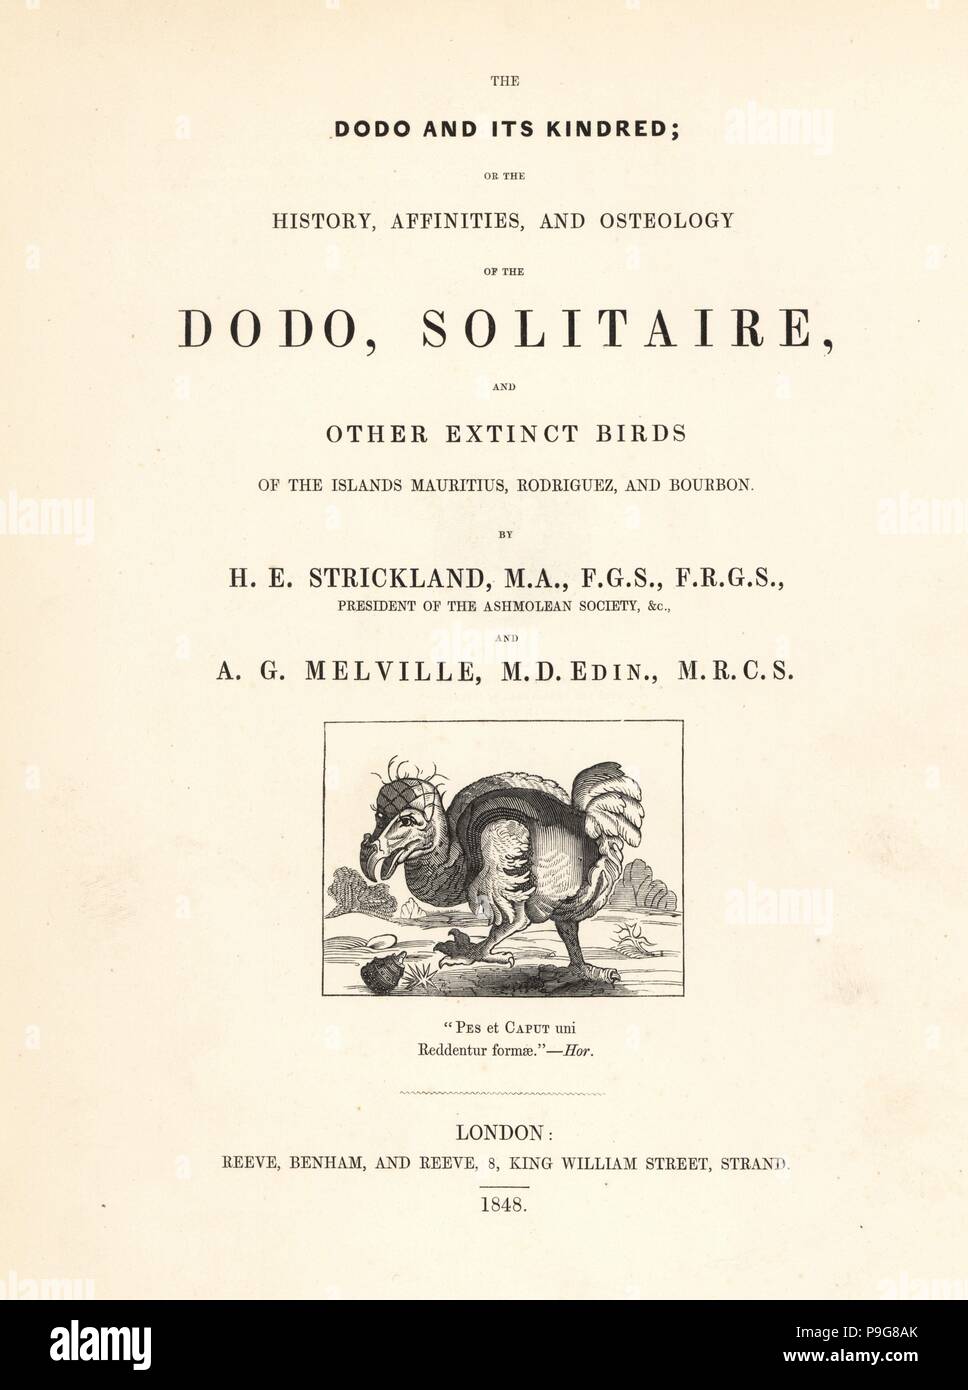 Title page with Willem Ysbrantsz Bontekoe's illustration of the dodo, Raphus cucullatus, 1648. Title page from Hugh Edwin Strickland and Alexander Gordon Melville's The Dodo and its Kindred, London, Reeve, Benham and Reeve, 1848. Stock Photo